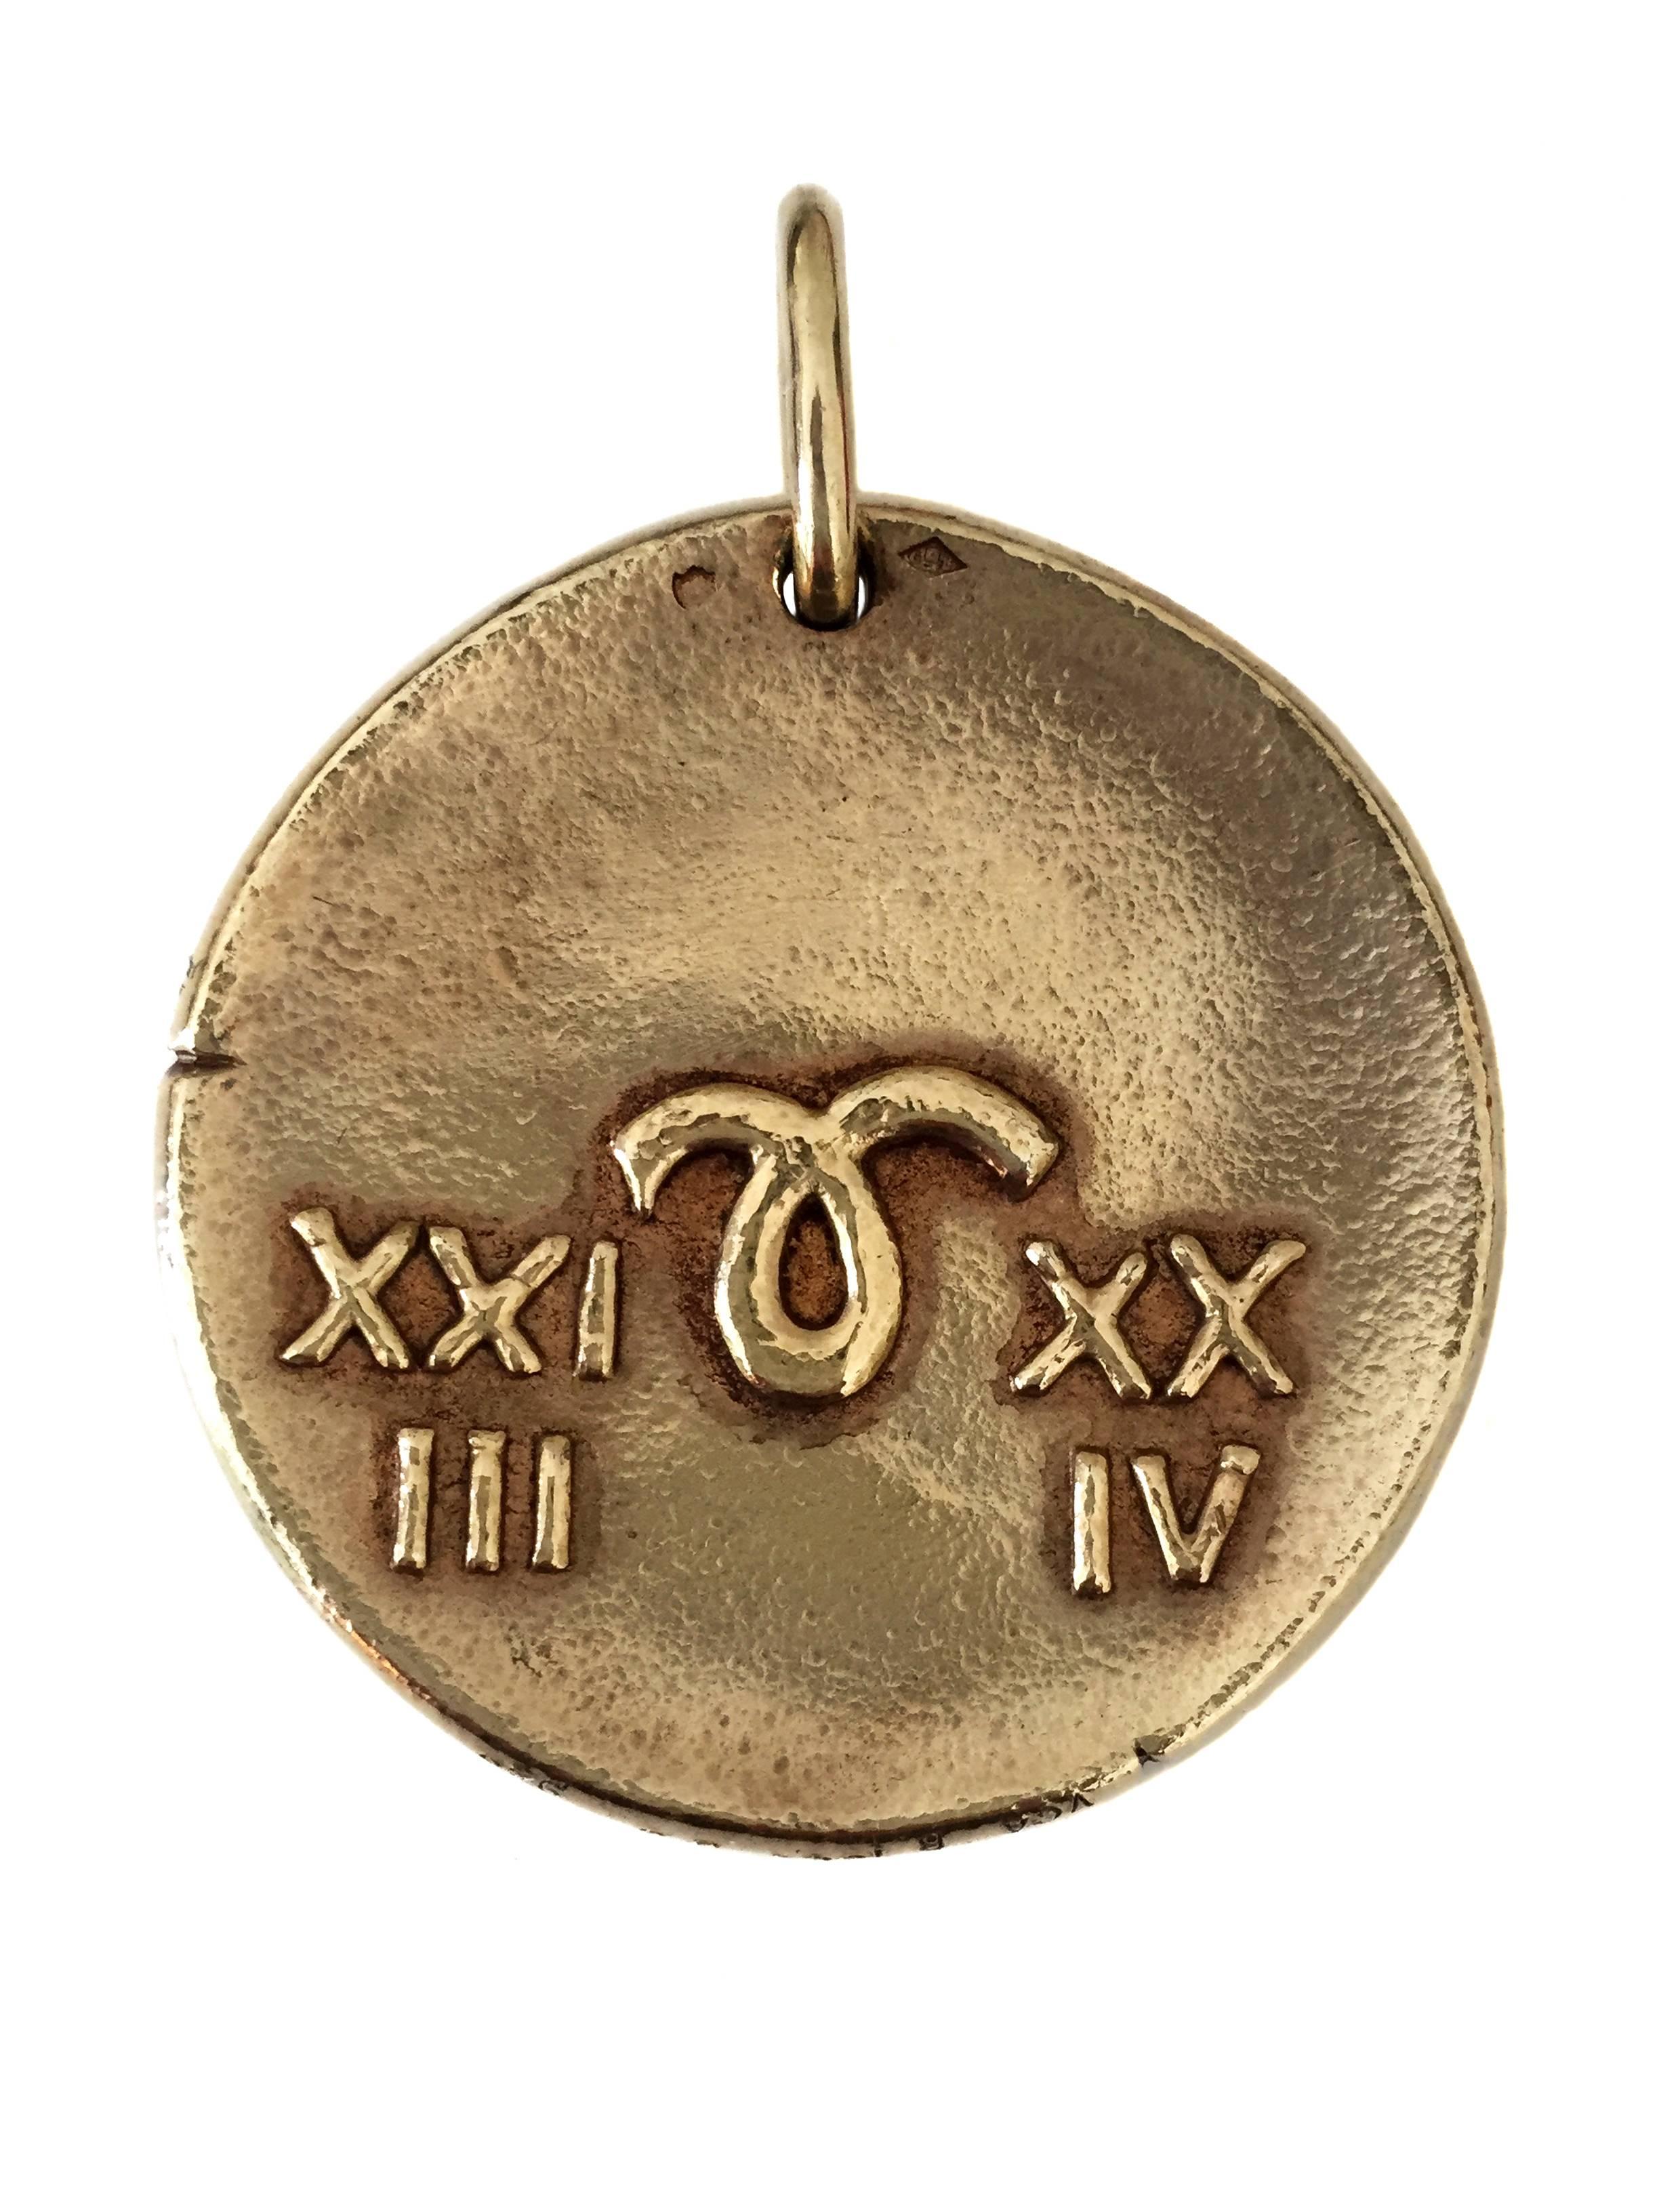 Van Cleef & Arpels - Gold - circa 1960

Designed in the style of an ancient coin, this Aries zodiac pendant is for those born between March 21- April 19th. The front of the pendant features a magnificent crafted two dimensional Ram. The reverse